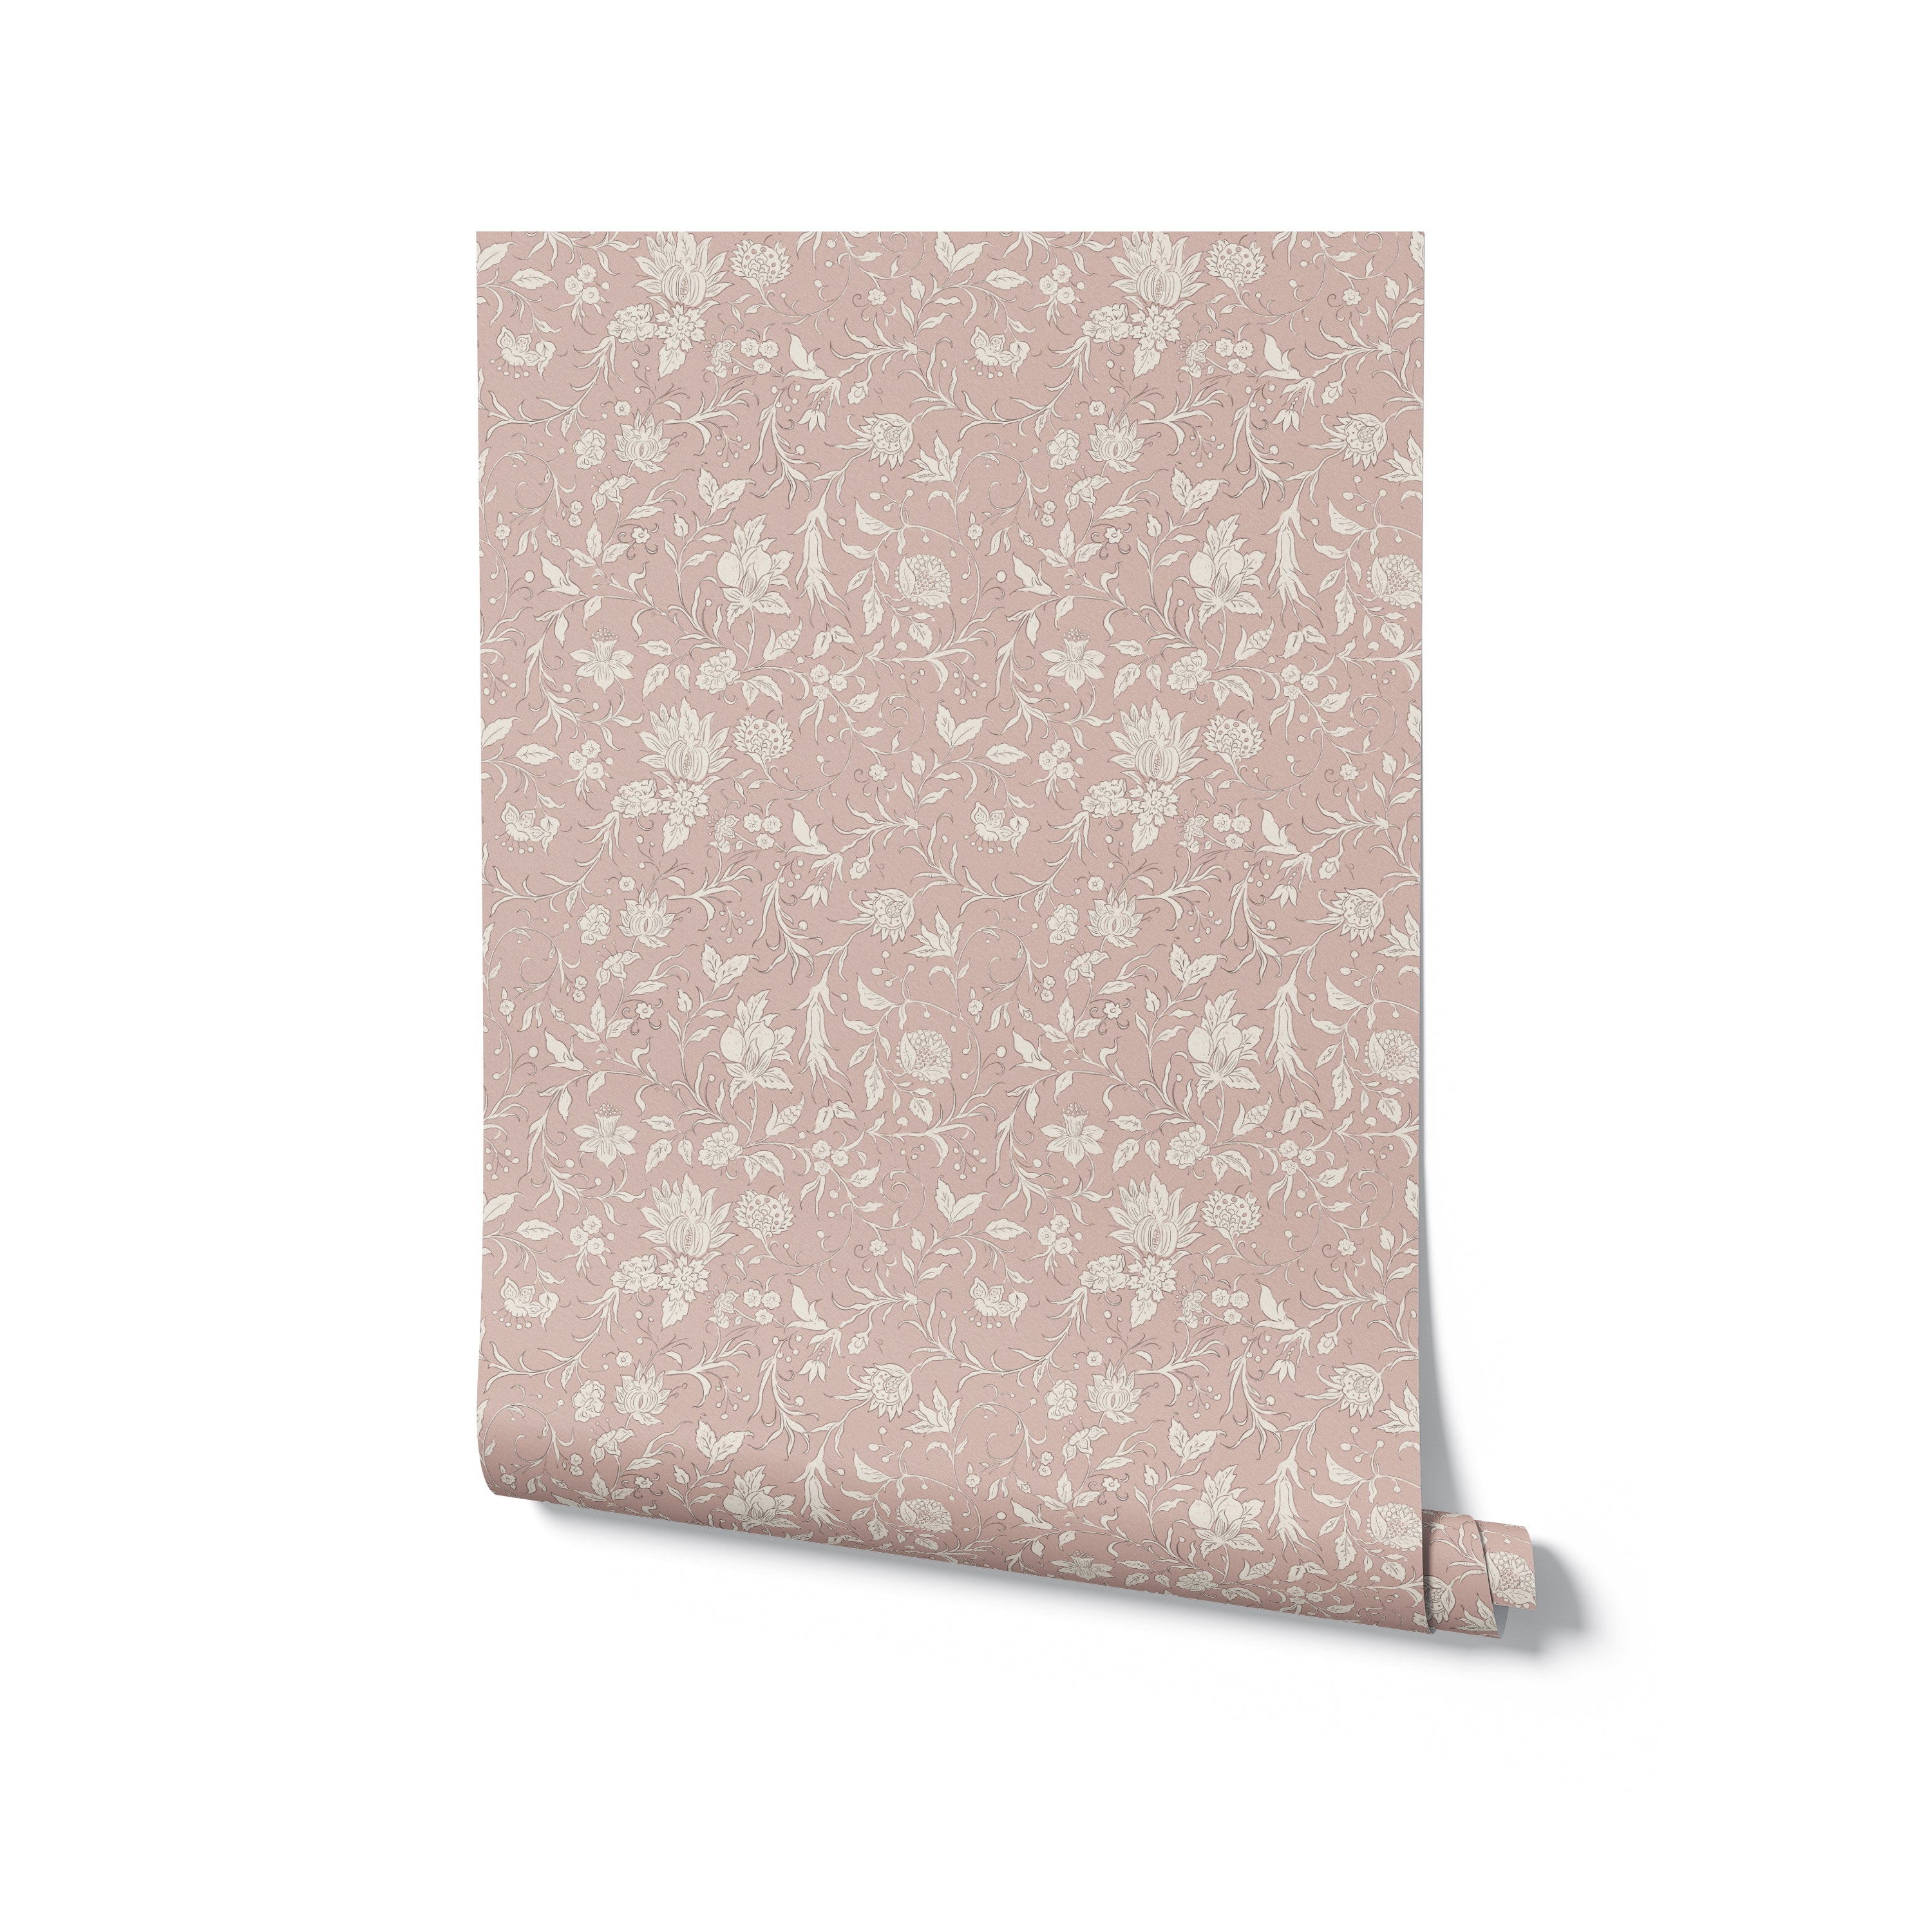 A single roll of Noble Florals Wallpaper displayed against a white background, highlighting the intricate floral pattern in cream on a muted mauve base. The elegant design is perfect for adding a touch of vintage charm to any space.